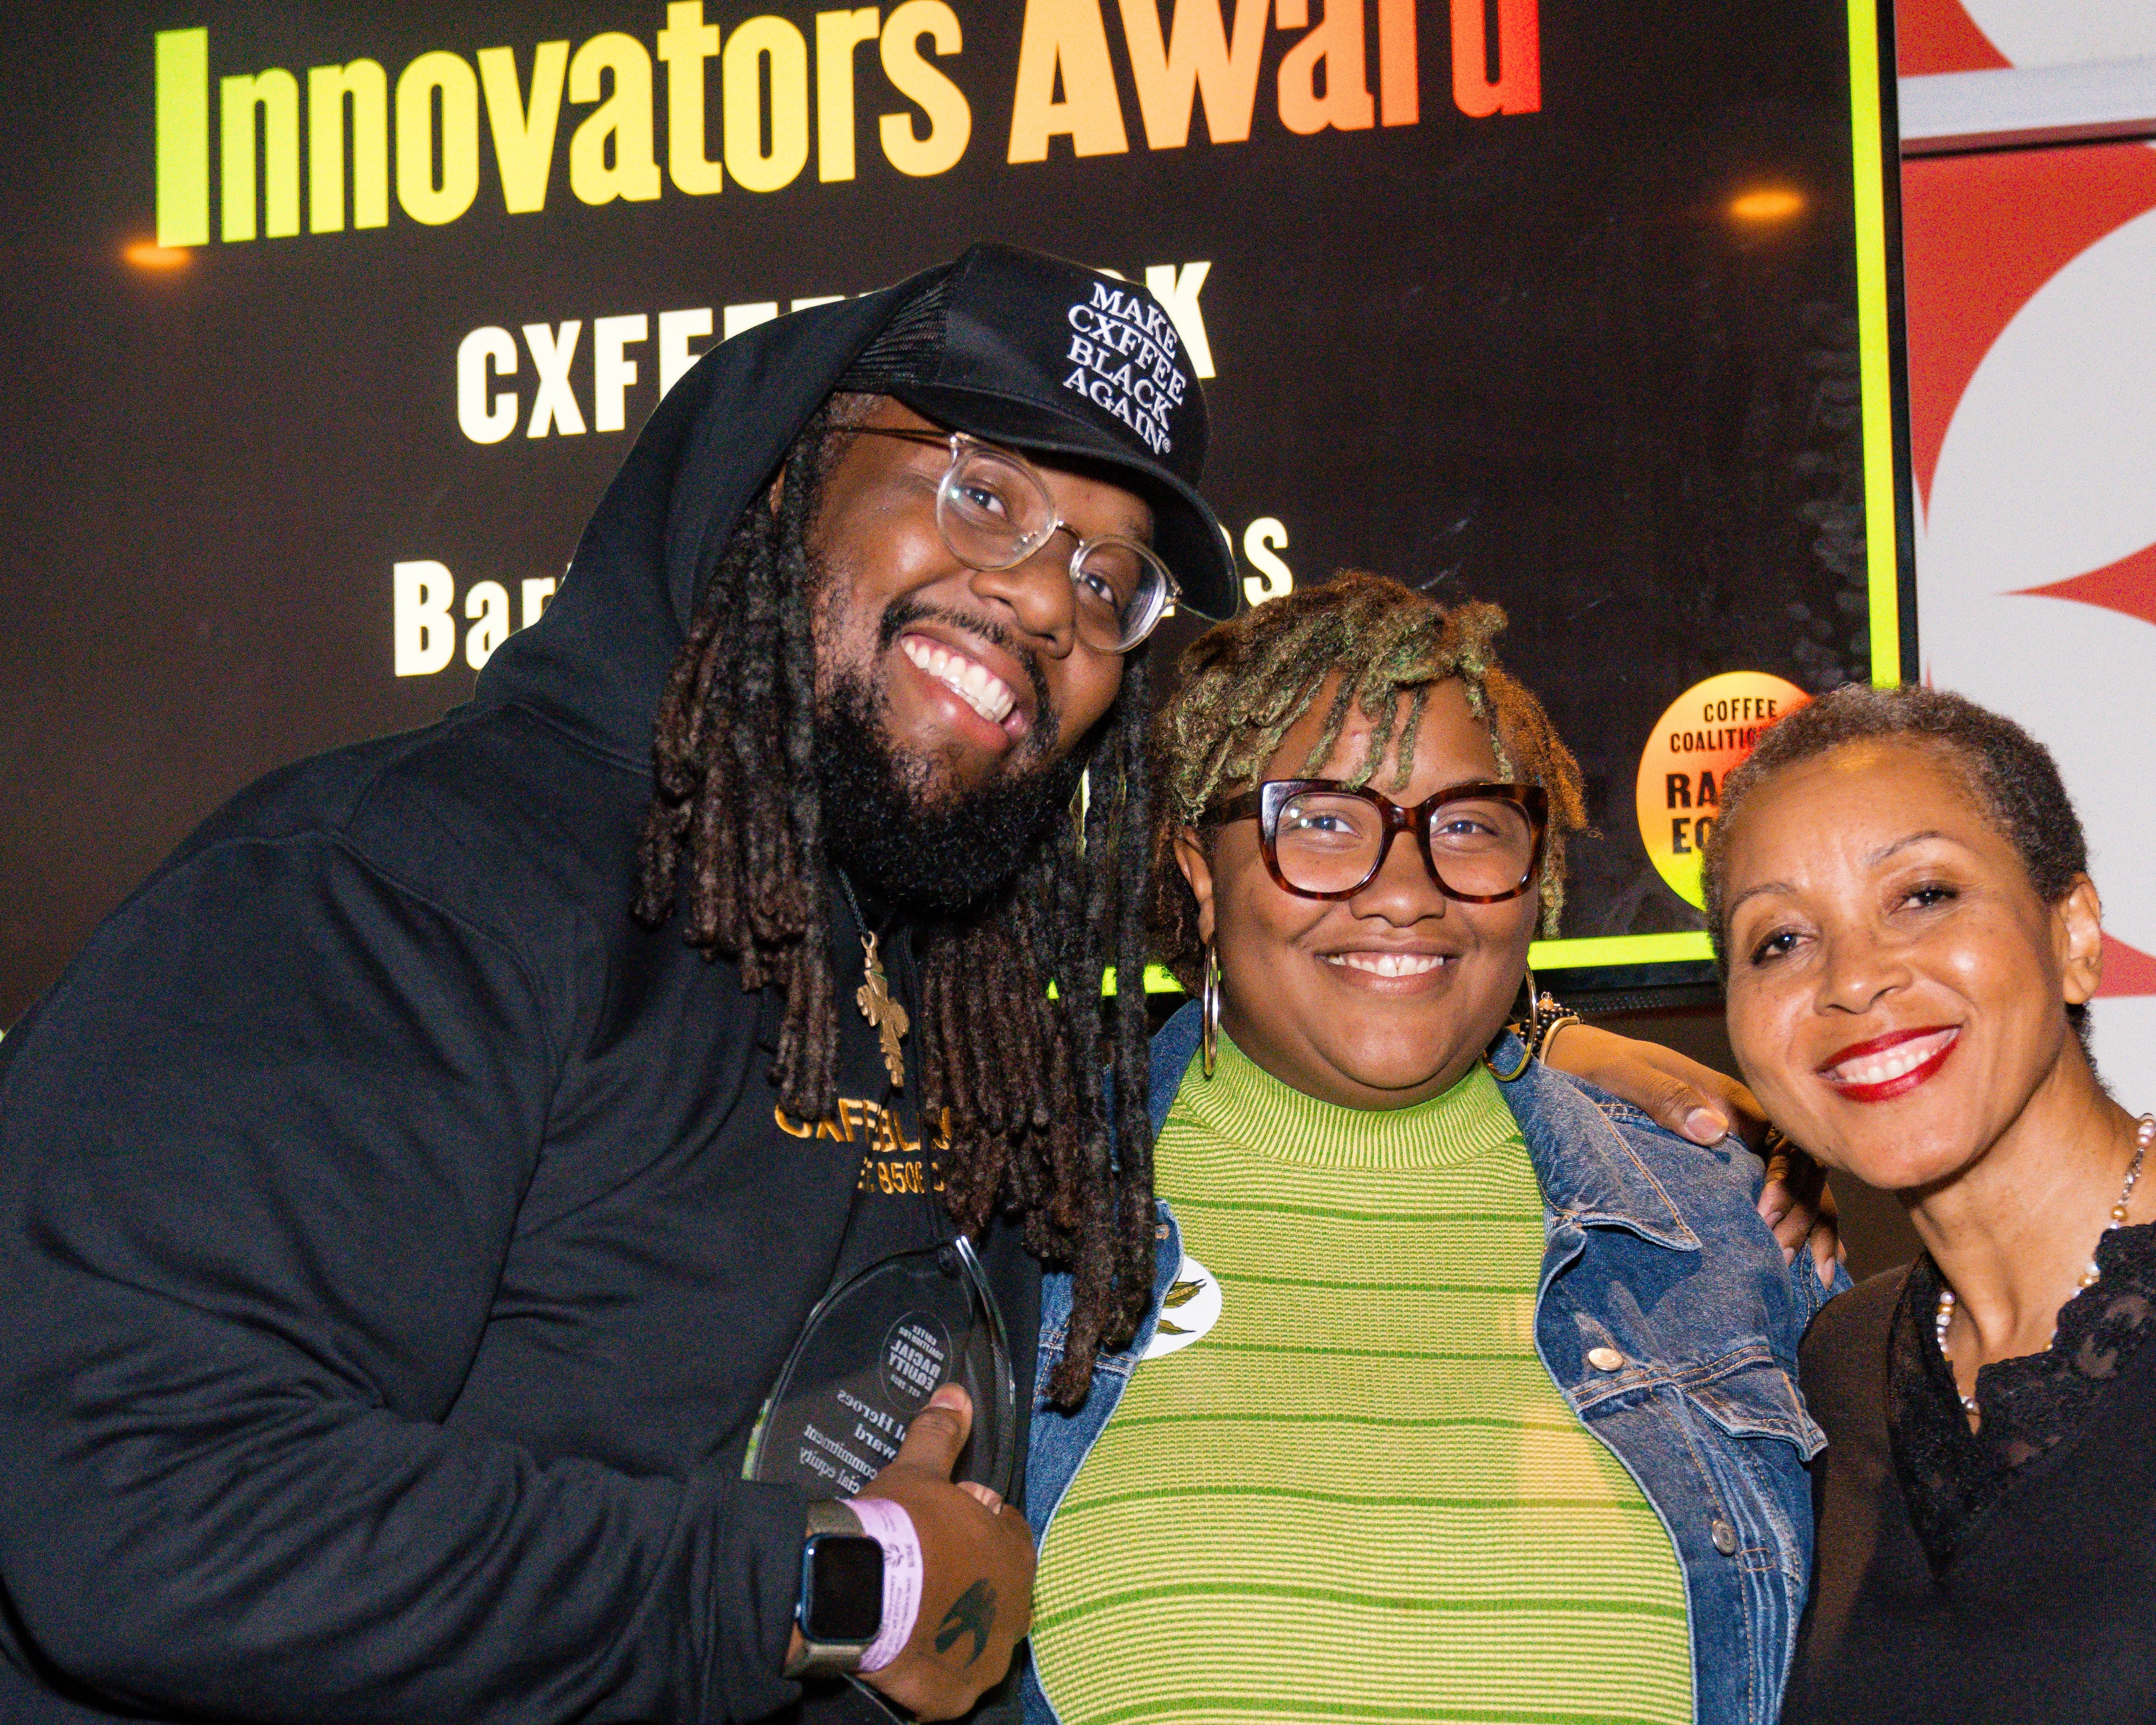 Cxffeeblack: From Memphis Rap to Specialty Coffee Innovator - The Story Behind This Tennessee Roasters Award-Winning Flair